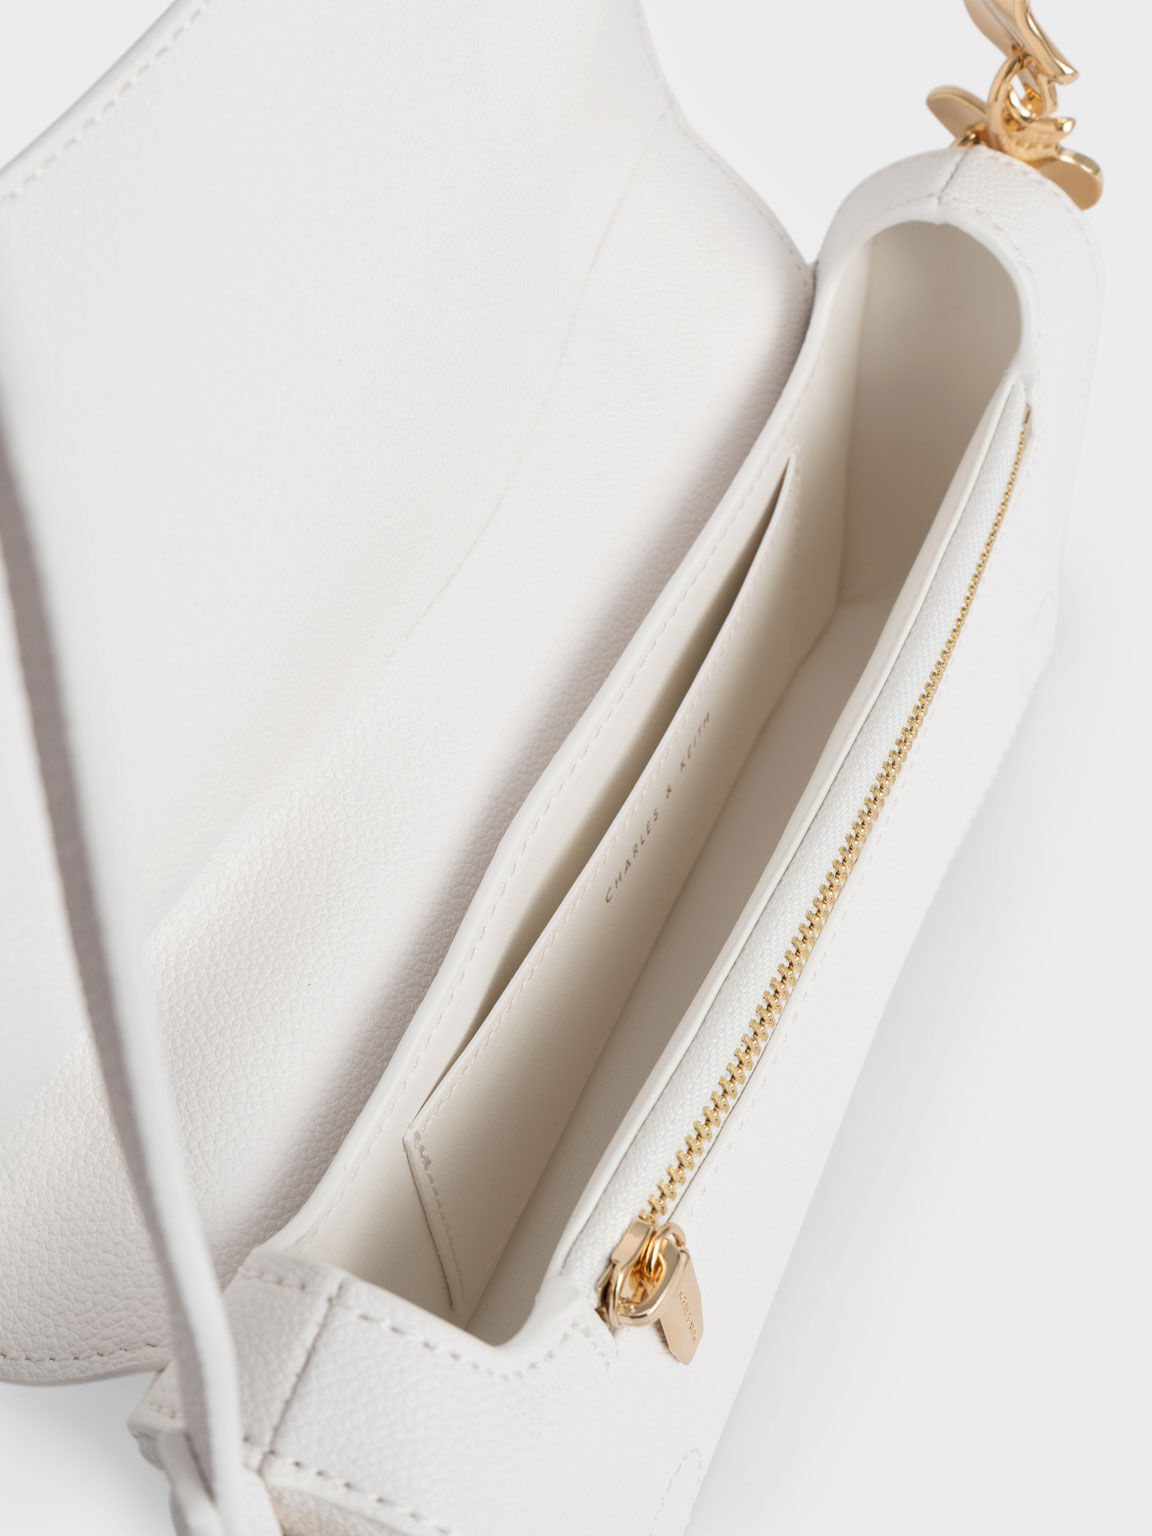 Women's Handbags | Exclusive Styles - CHARLES & KEITH SG